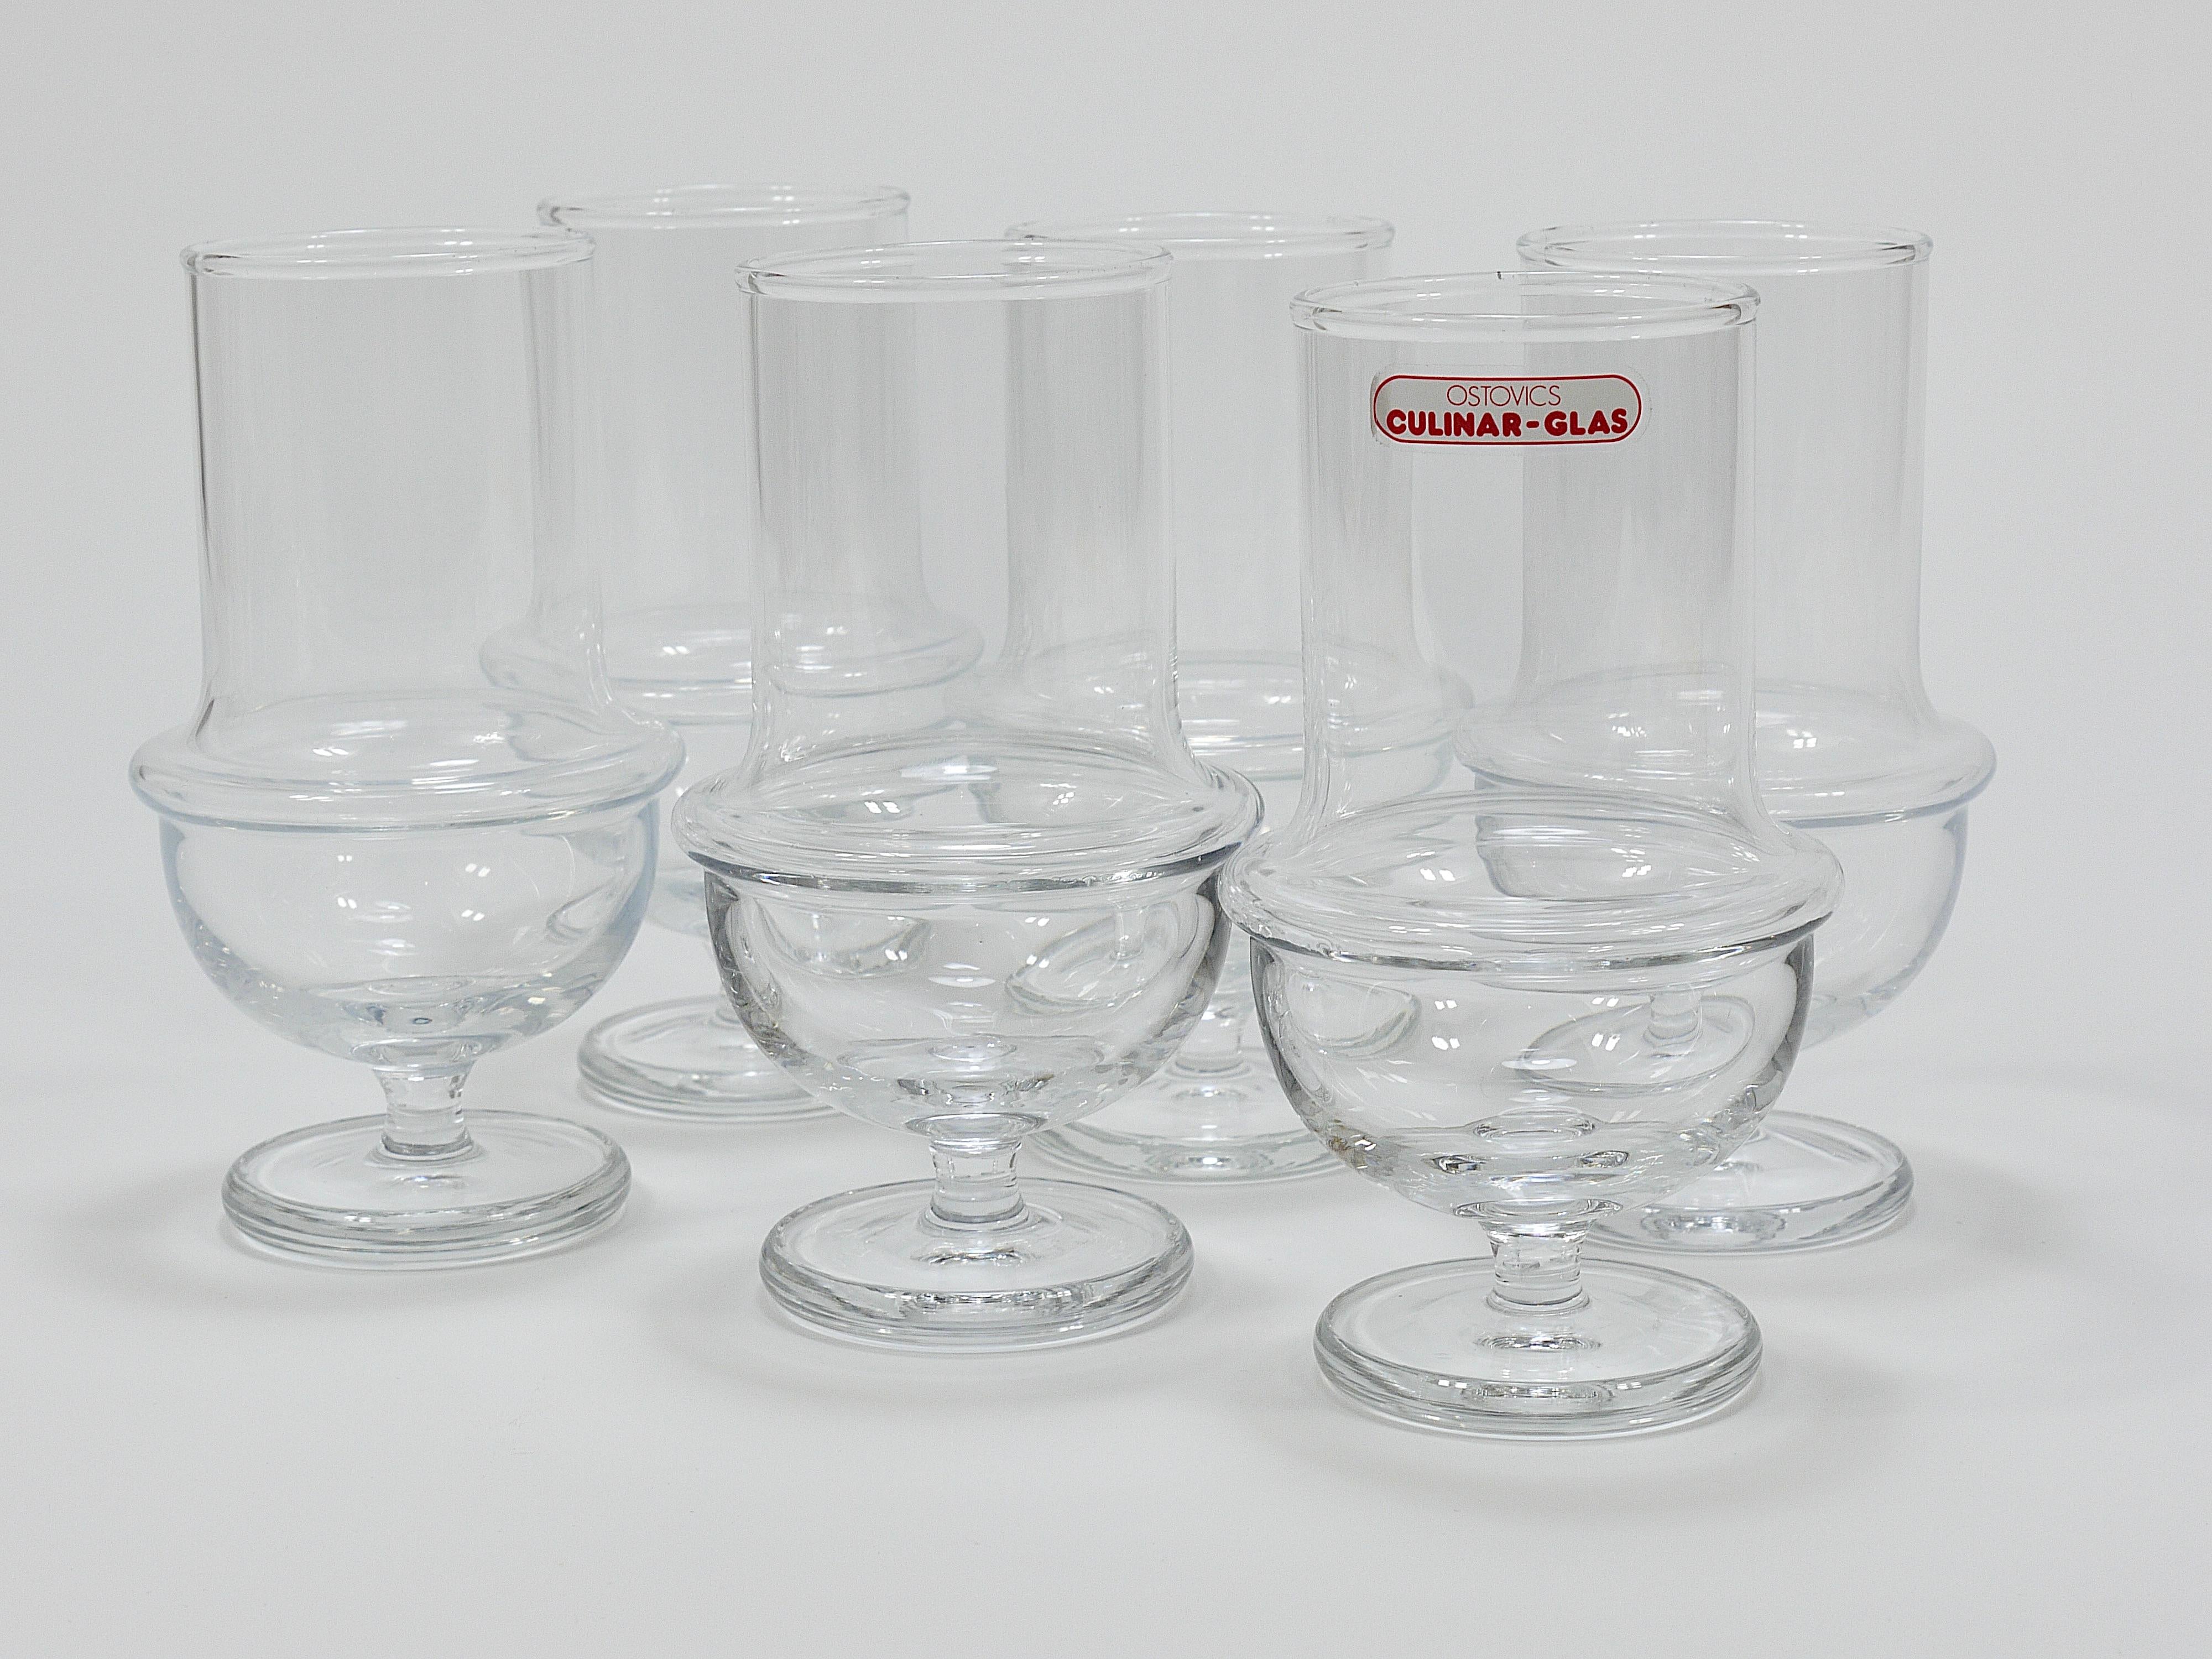 A set of six large, modernist stem drinking glasses from the 1970s, ideal for wine, beer, cocktails, water, or soda. Designed by Carl Auböck and crafted by Ostovics Culinar Vienna, these Austrian glasses are beautiful, unusual, and rare. They remain